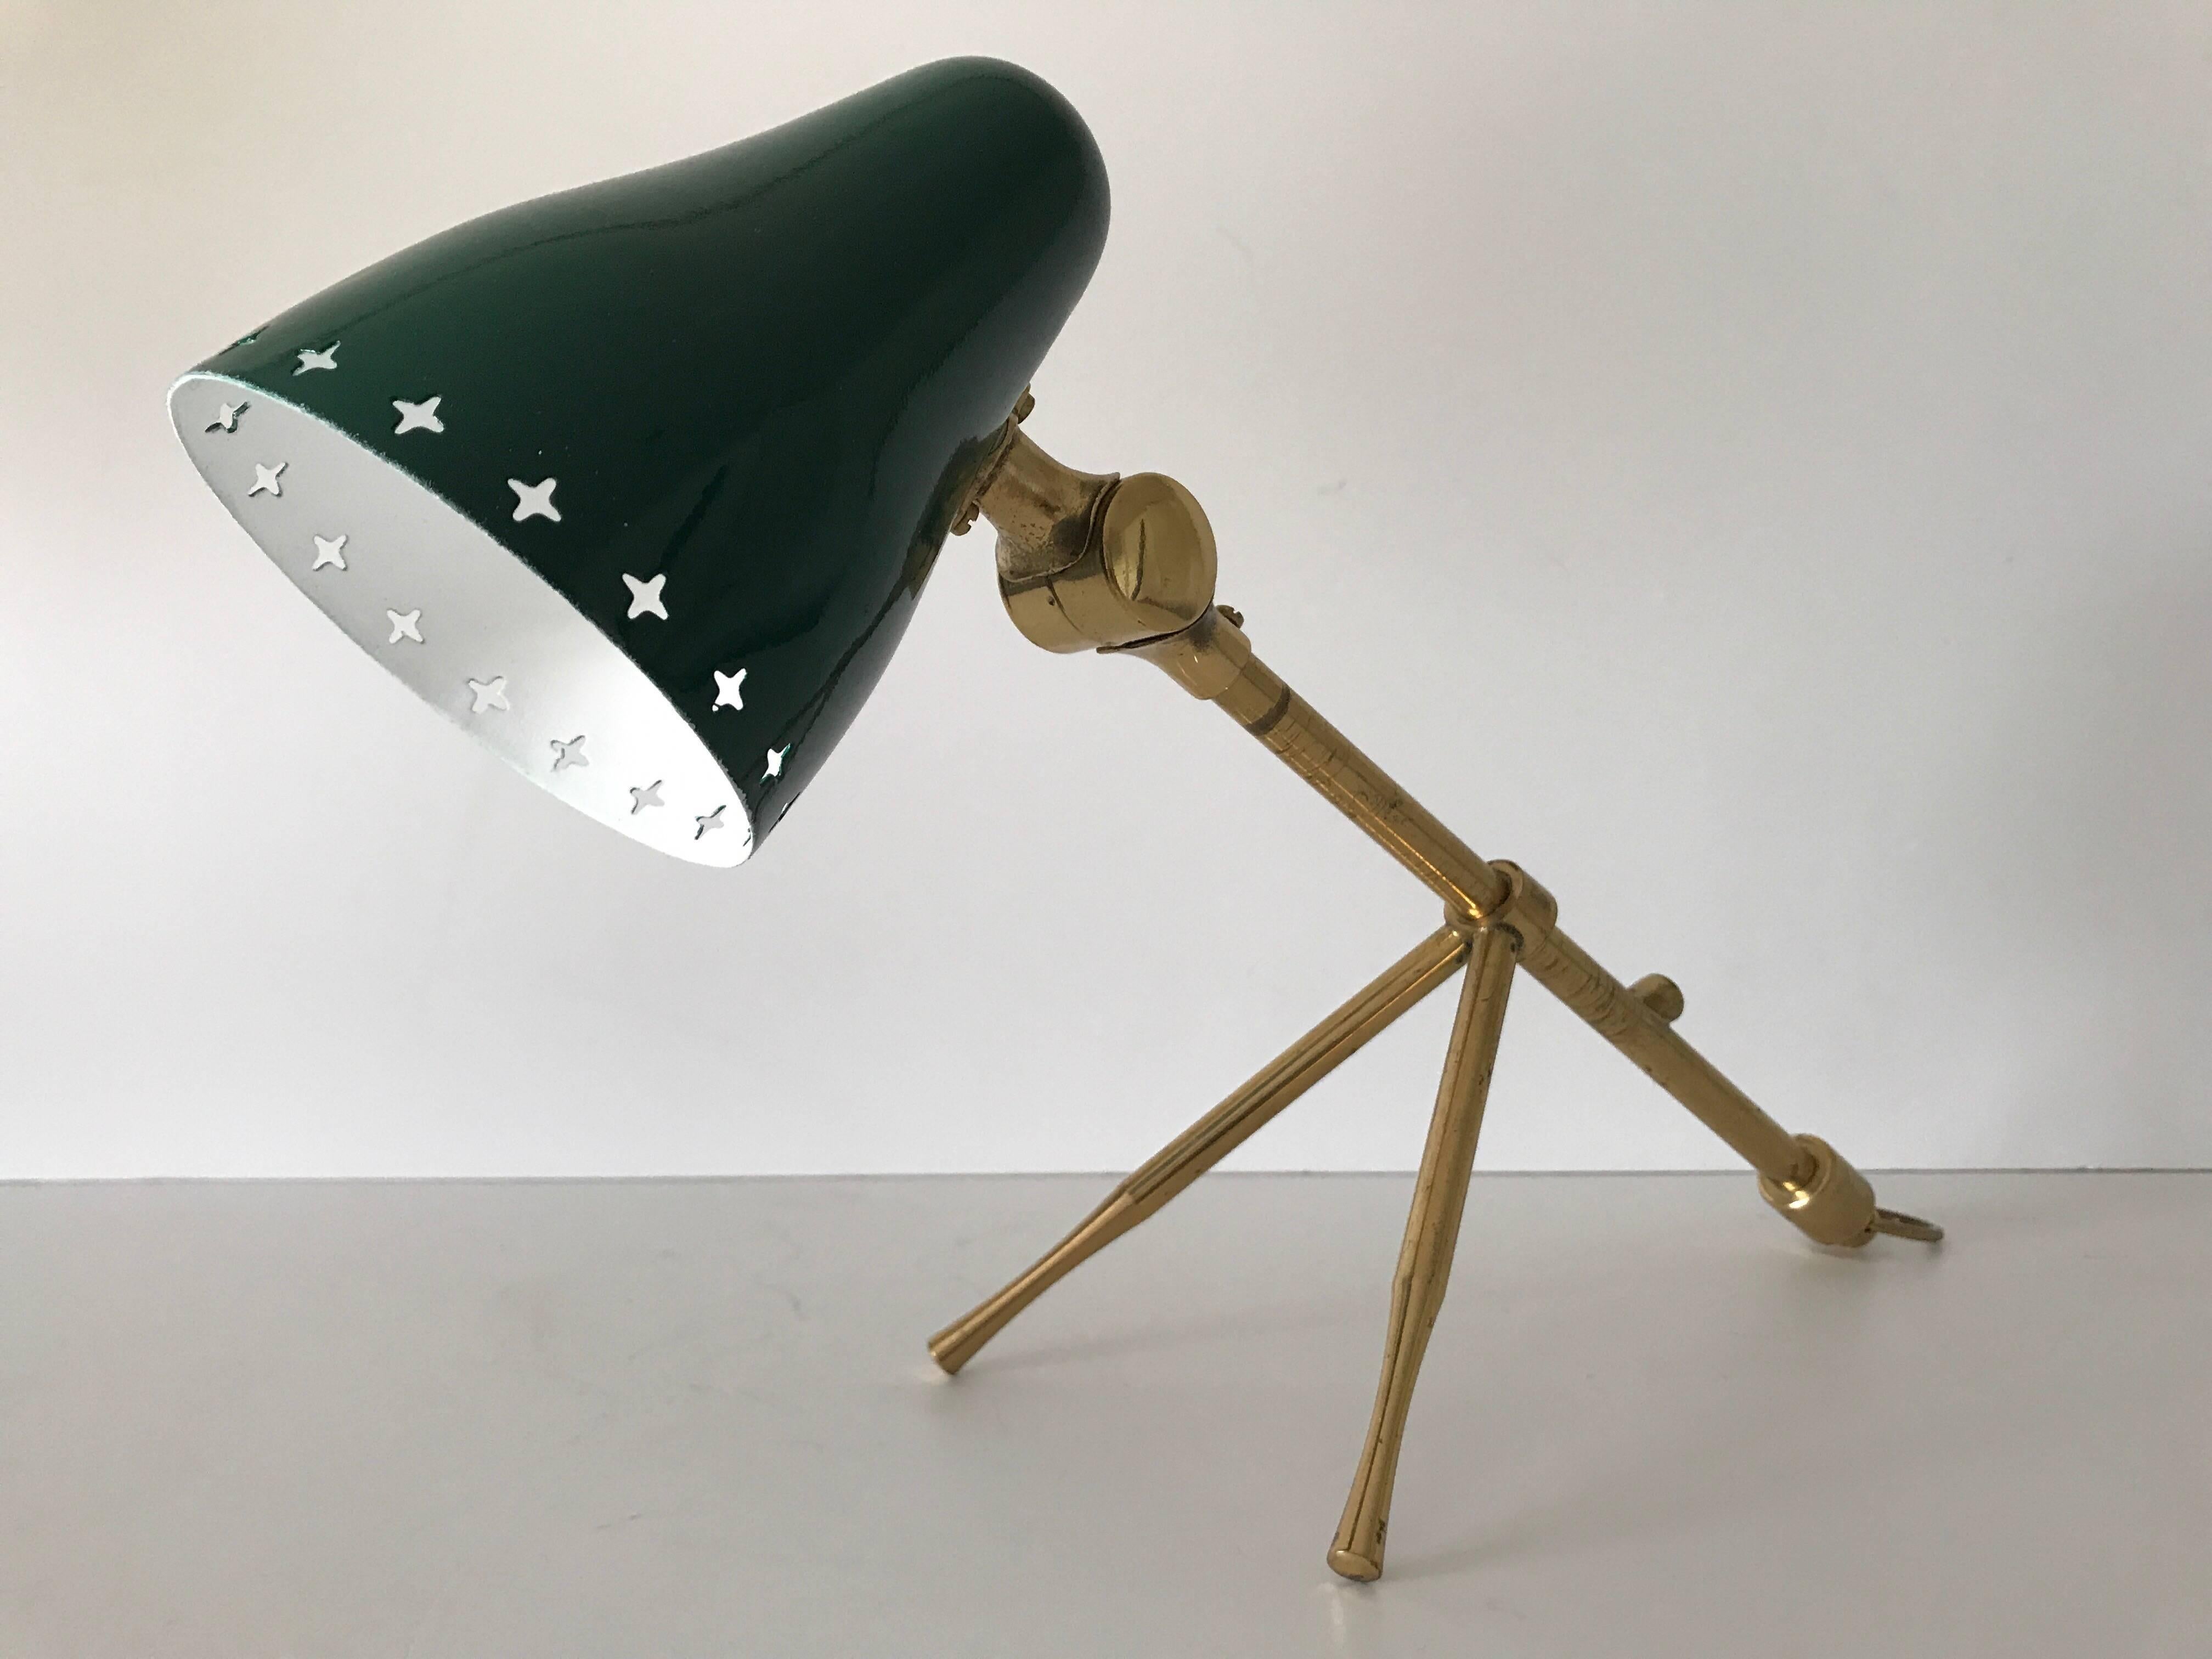 Swedish brass table and wall lamp Boris Lacroix style, 1950s. 
A very nice table and wall lamp, as it can be hung in the ring upside down as a wall sconce. It is in a very nice condition and it measures 35cm in length and 21cm in height when